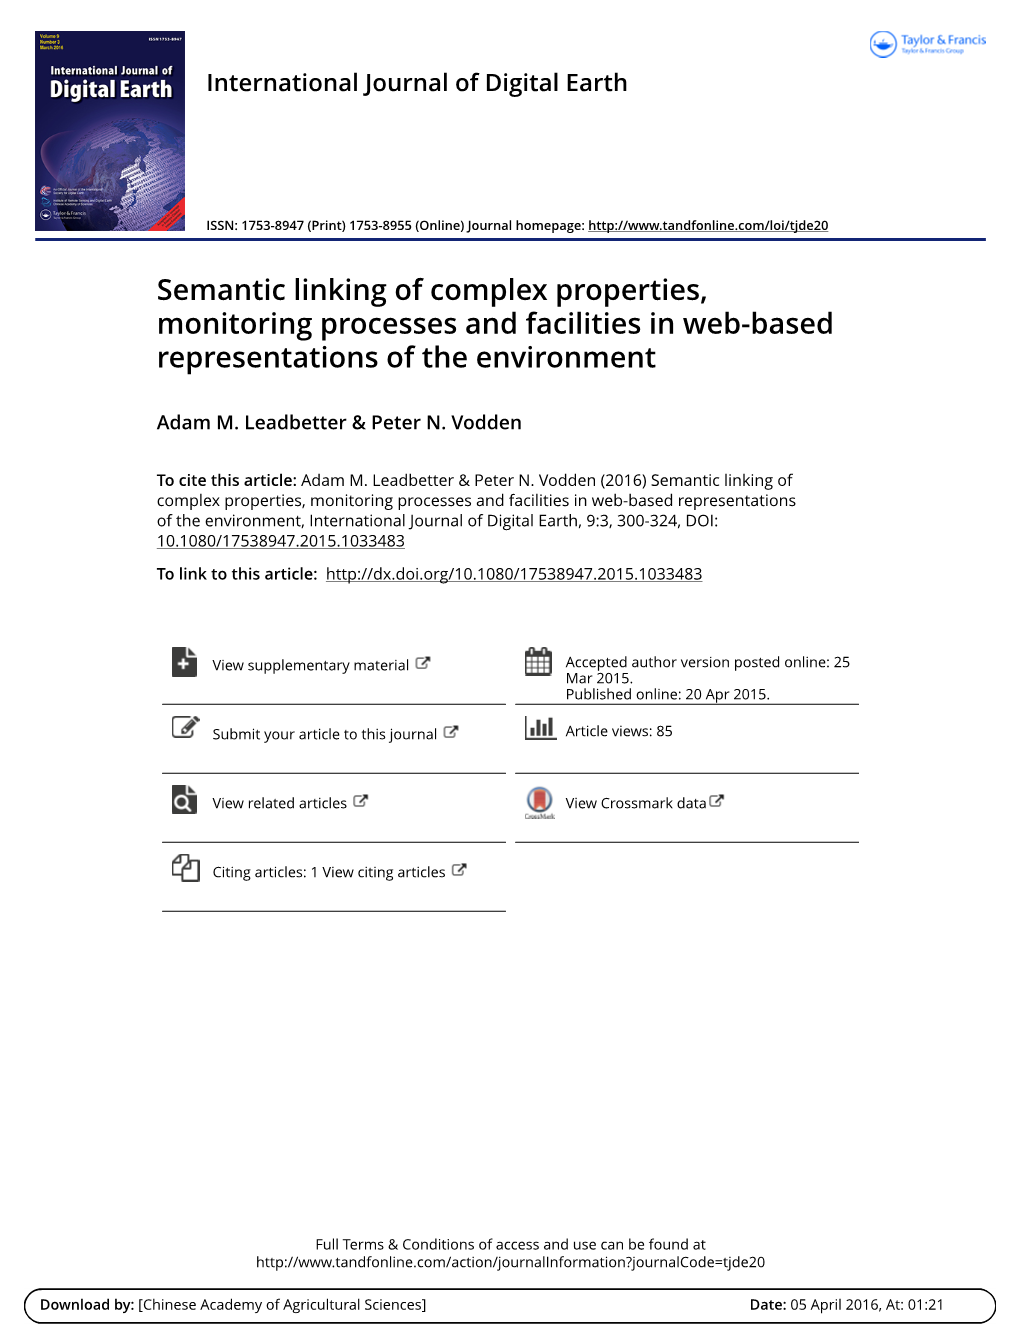 Semantic Linking of Complex Properties, Monitoring Processes and Facilities in Web-Based Representations of the Environment